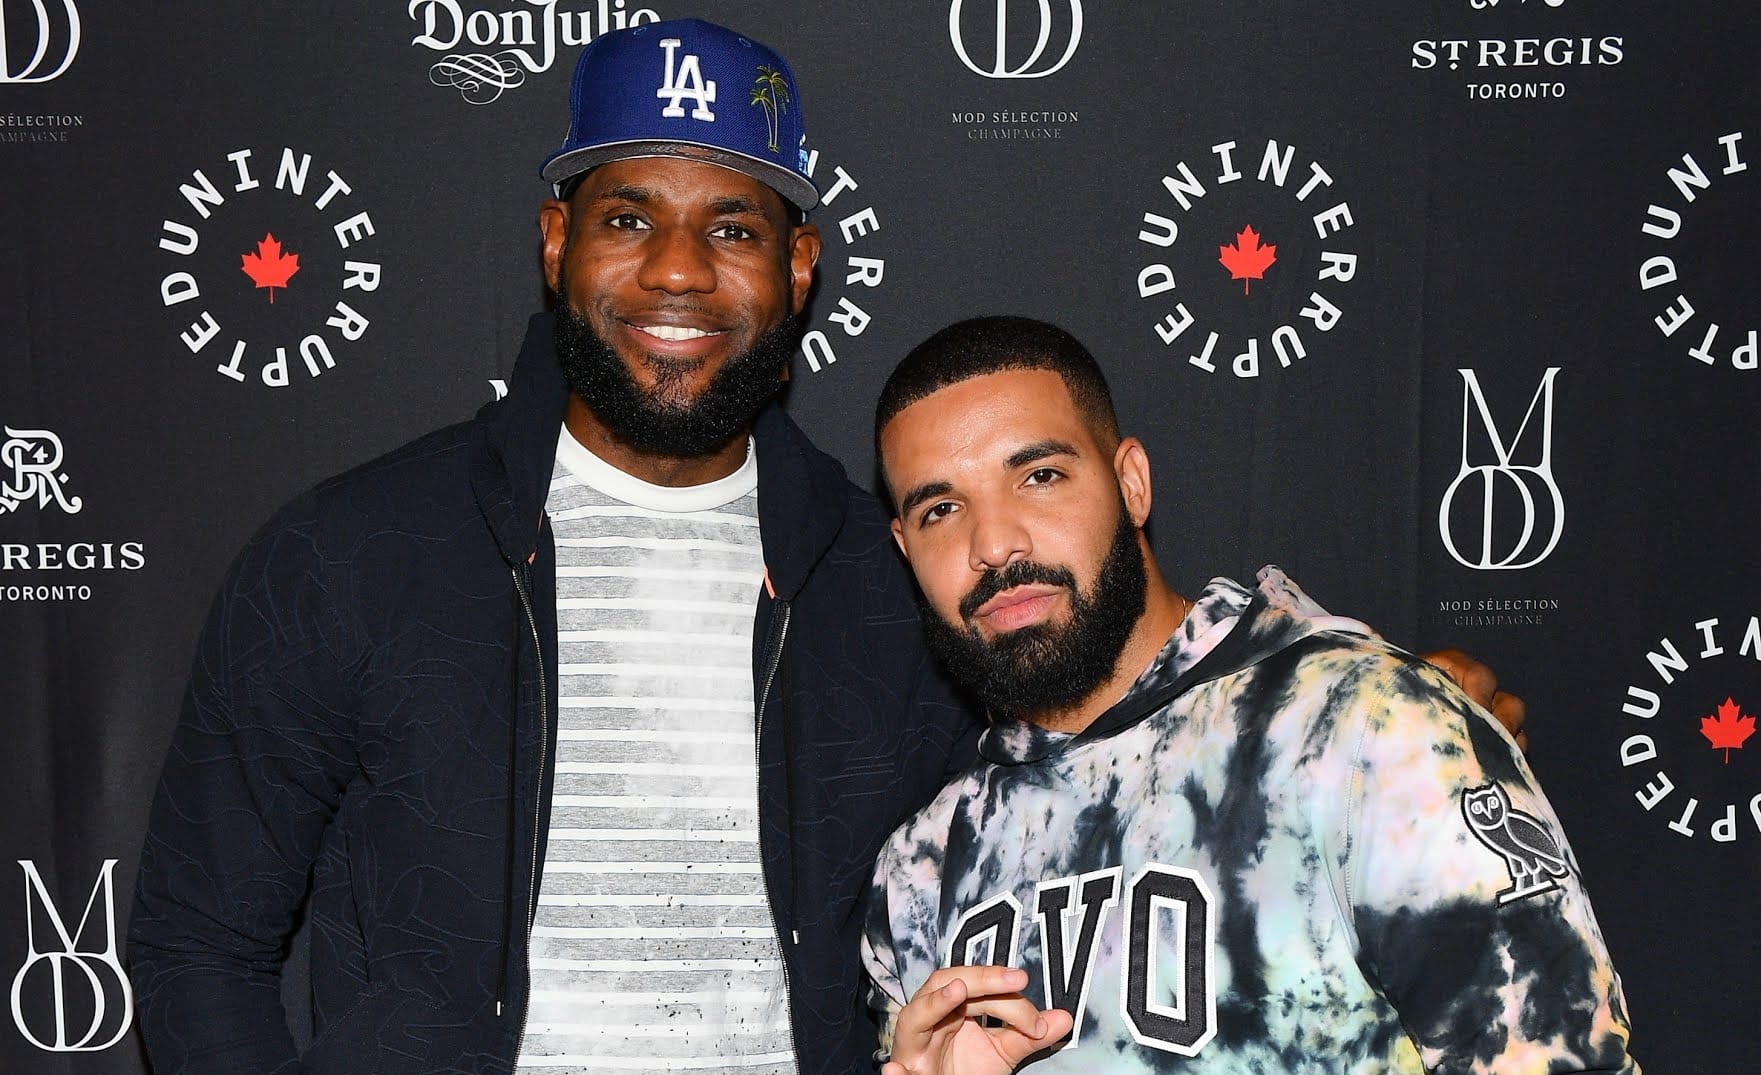 Drake teams up with LeBron James to surprise Toronto mother with $100K [Watch Video]